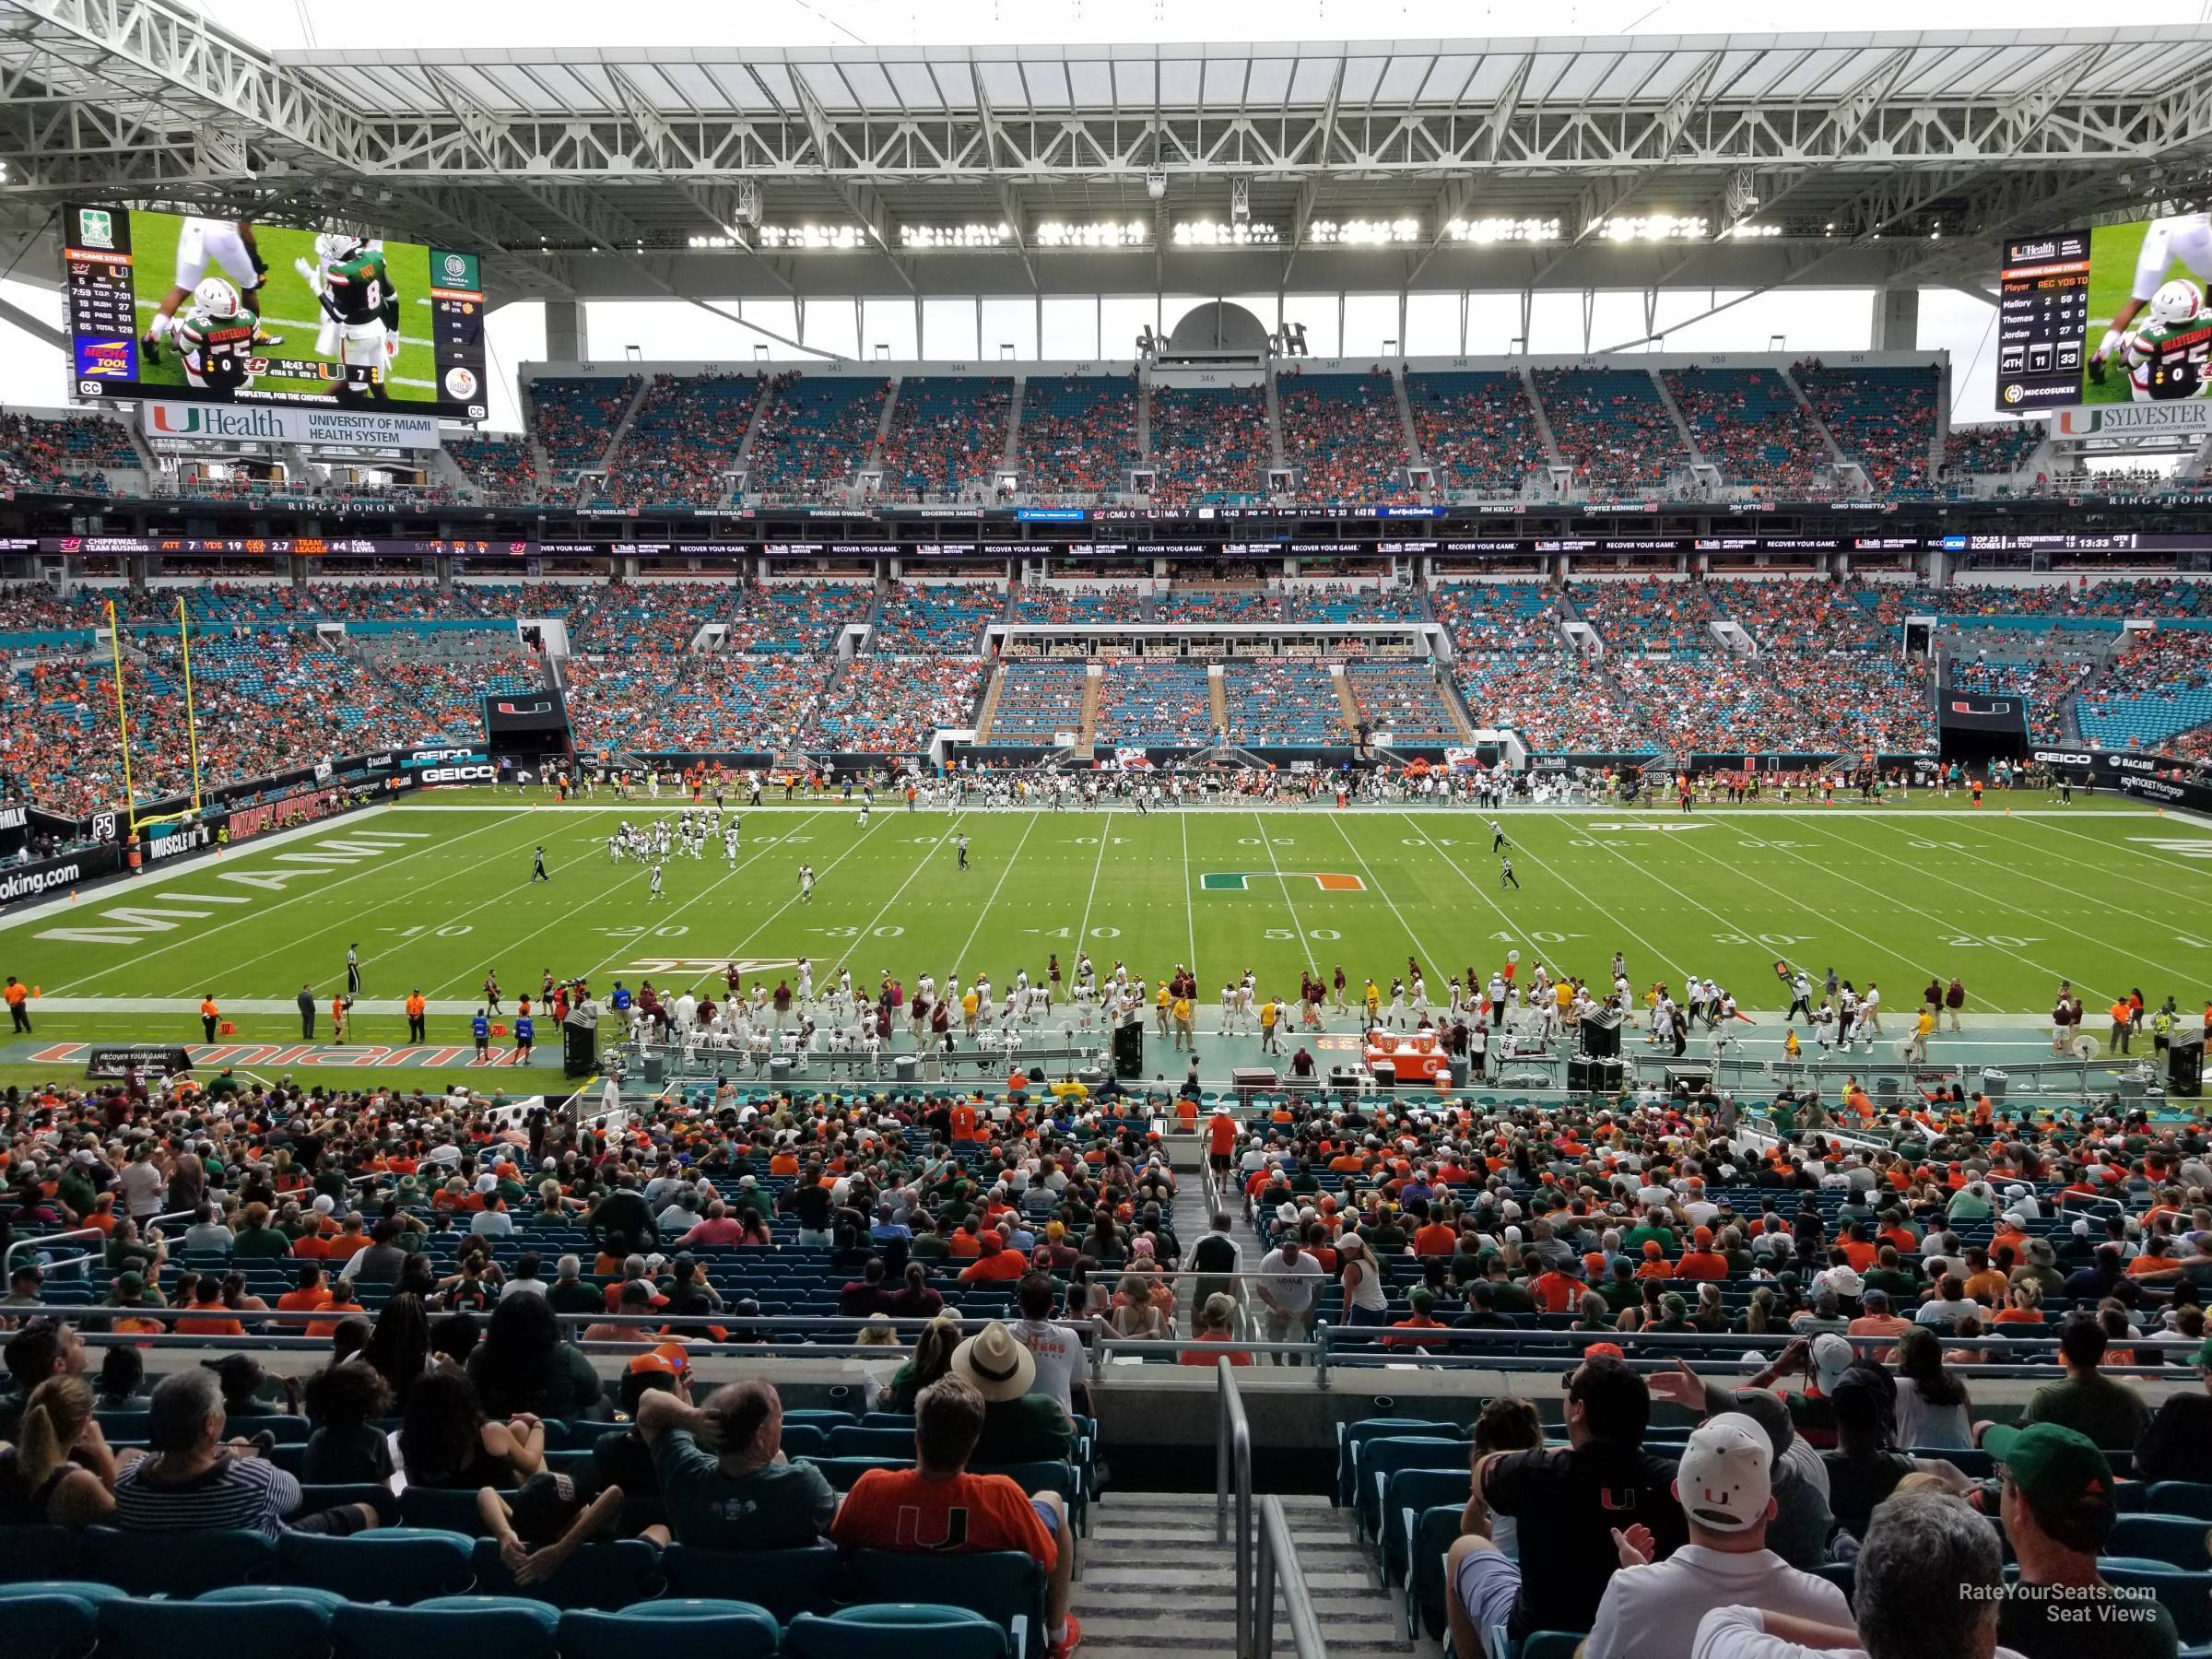 section 218, row 10 seat view  for football - hard rock stadium